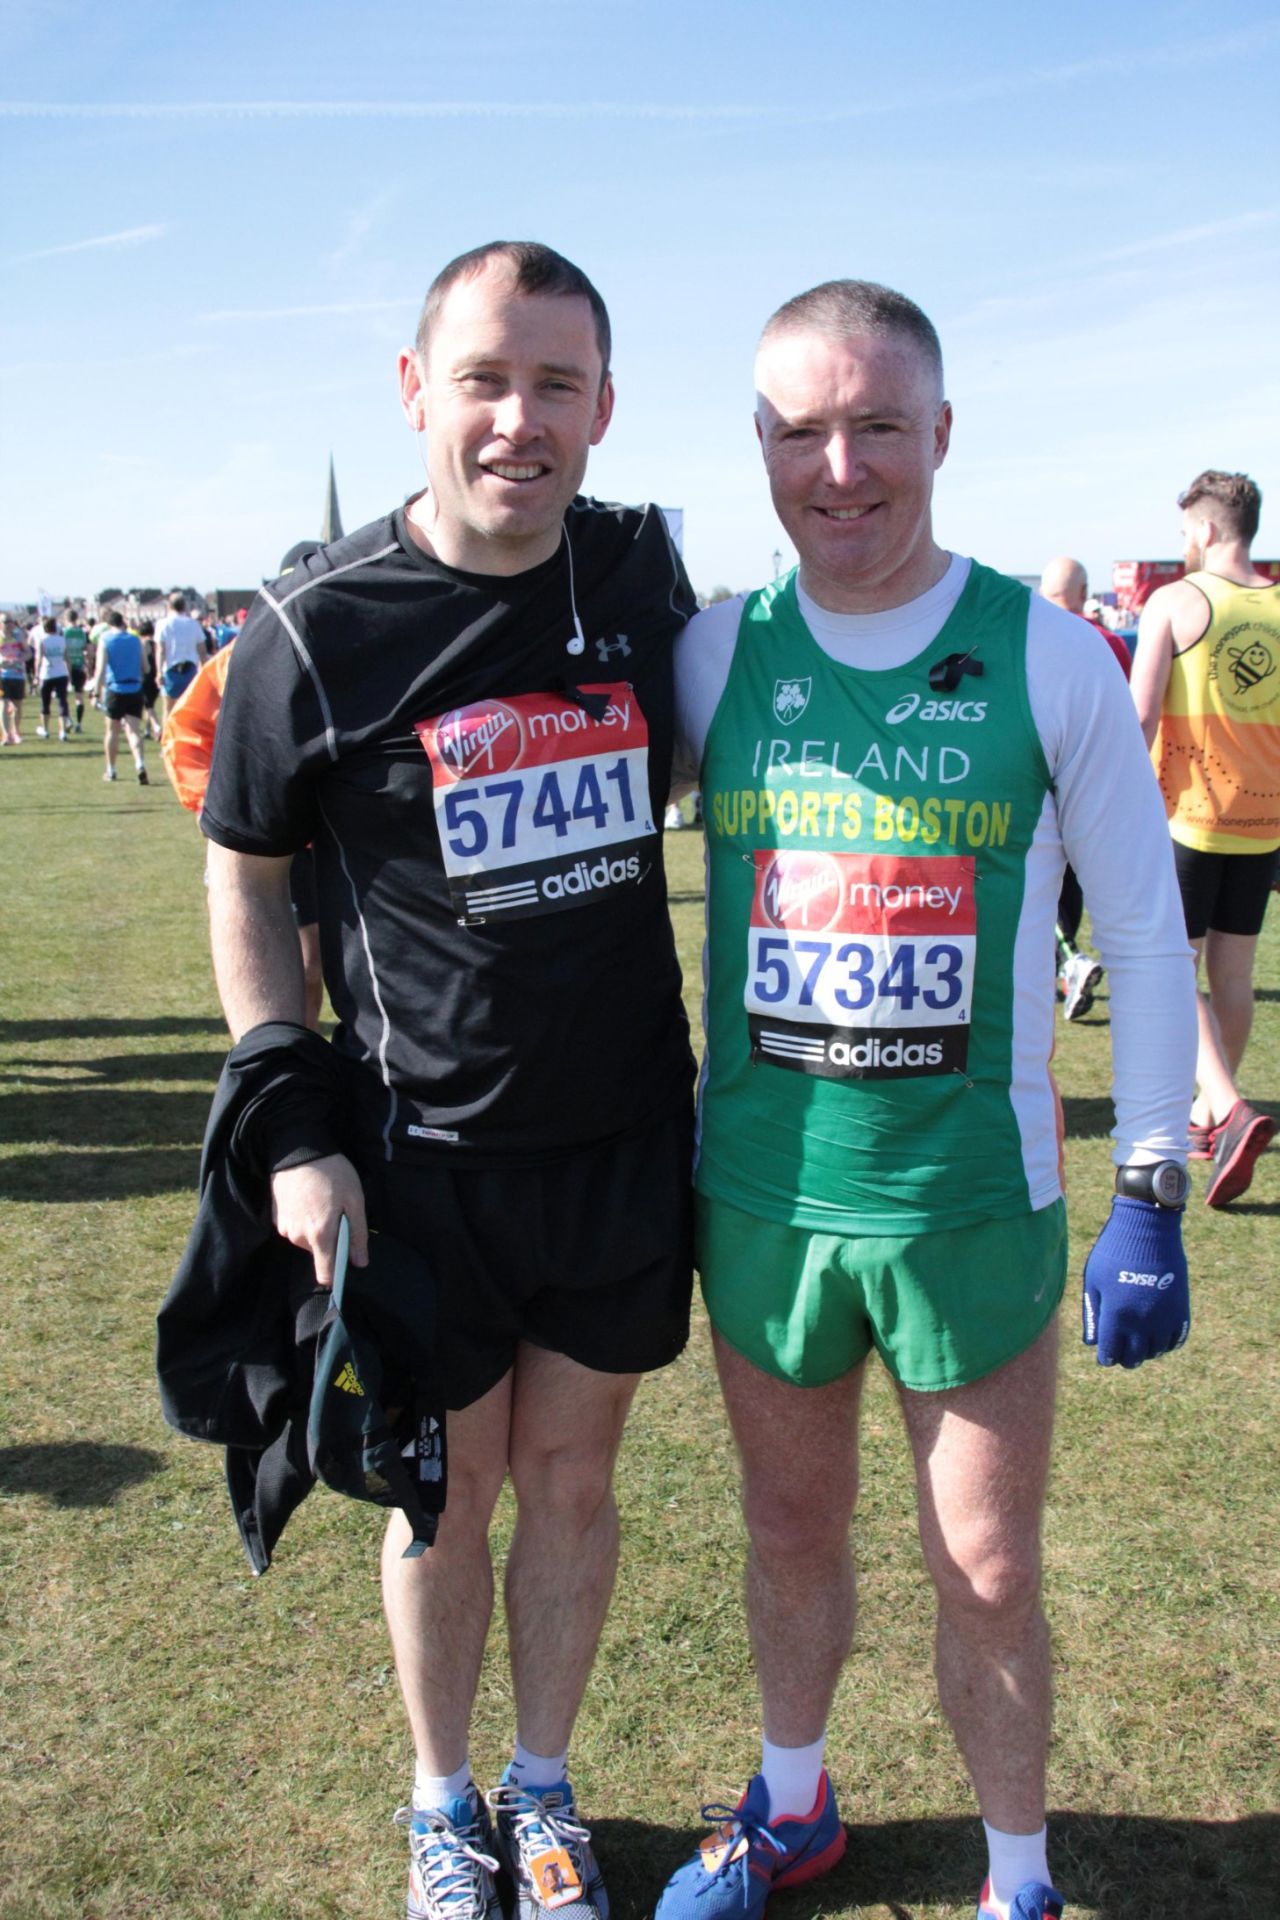 John O'Flynn (L) and John Gately (R) came from Cork, Ireland to participate in the London Marathon on April 21, 2013. Both have family in Boston but were not planning on competing, due to injury, until last week's tragic event changed their mind. O'Flynn said they wanted to compete to show solidarity to the people of Boston. 